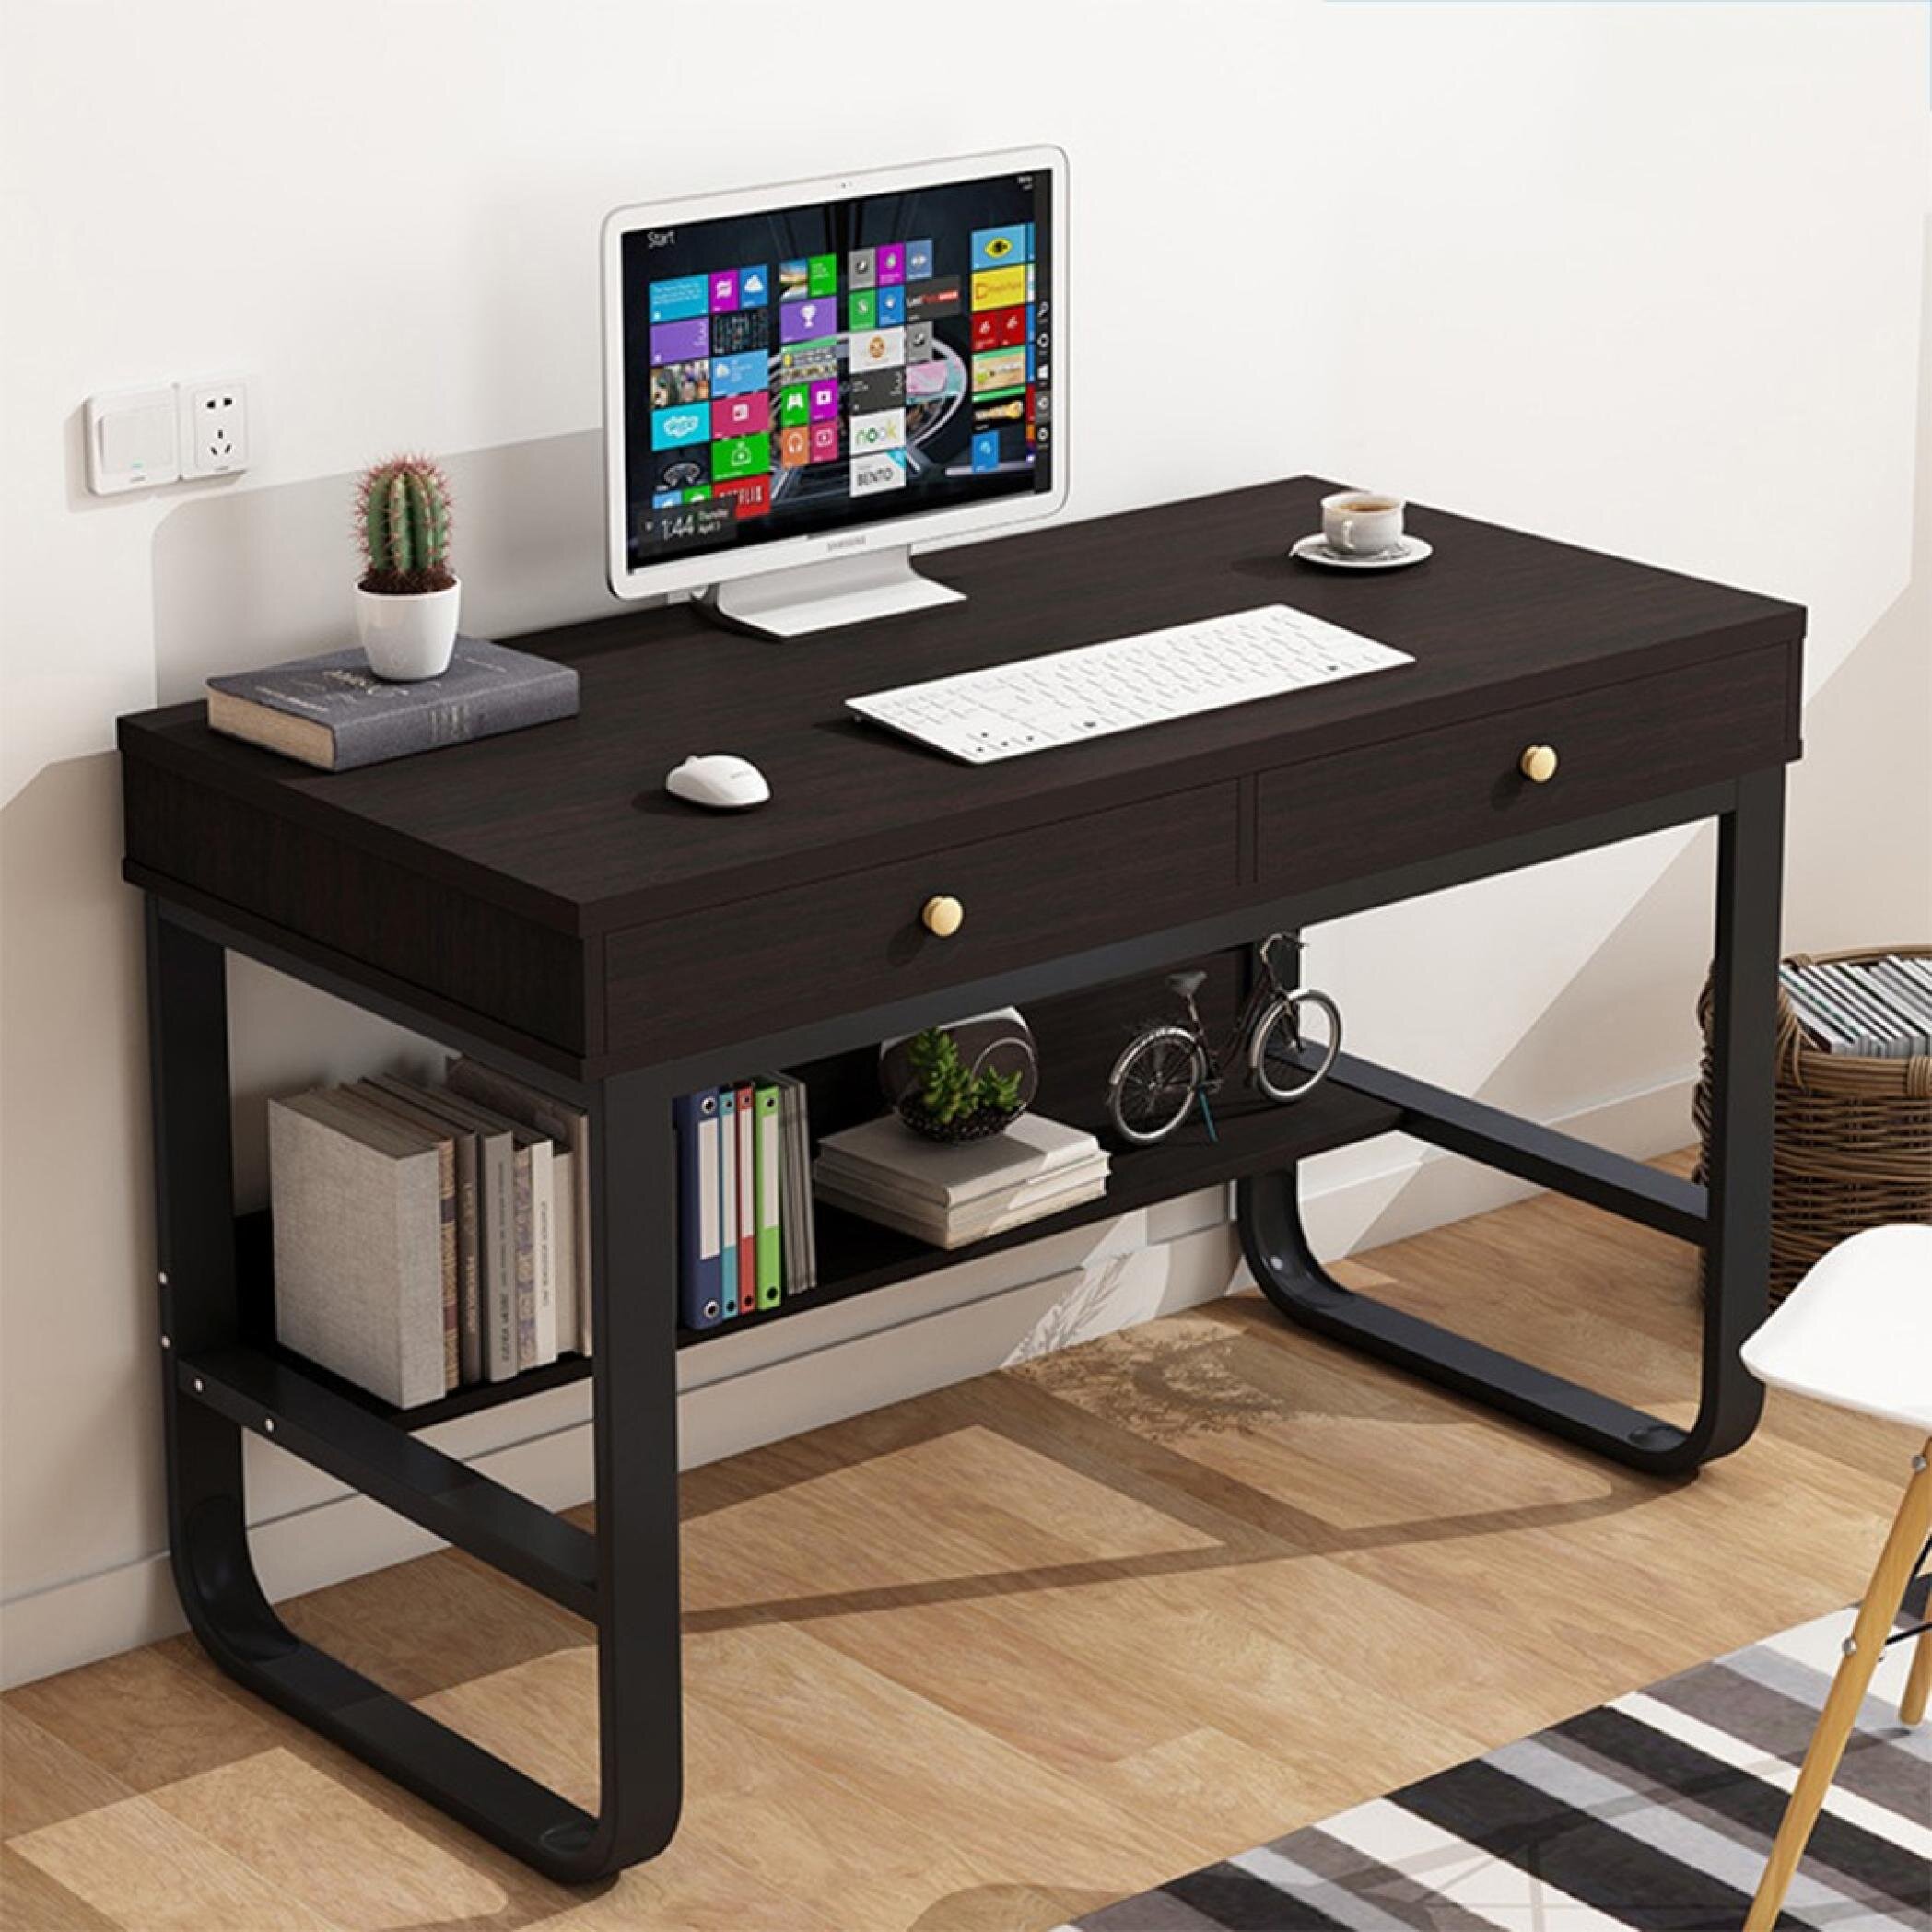 Details about   Gaming Desk Writing Study Computer Desk Home Office Table Folding Laptop Table